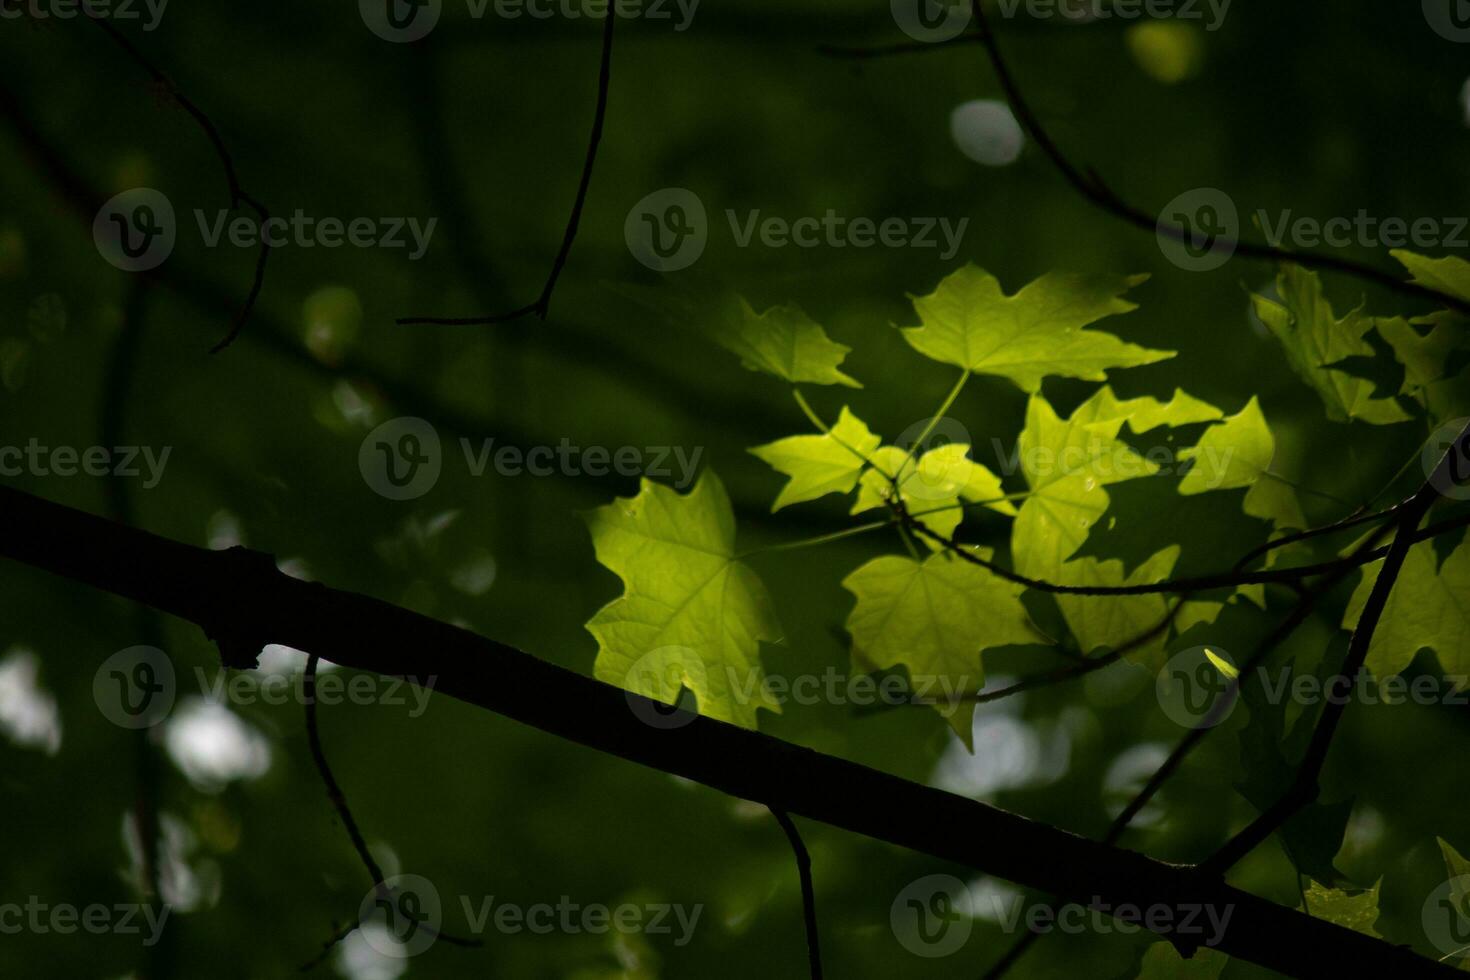 These are the leaves of the sugar maple, which were hanging in the forest. The sunlight reflecting off almost makes them look like they are glowing. The creases in the leaf are actually veins. photo